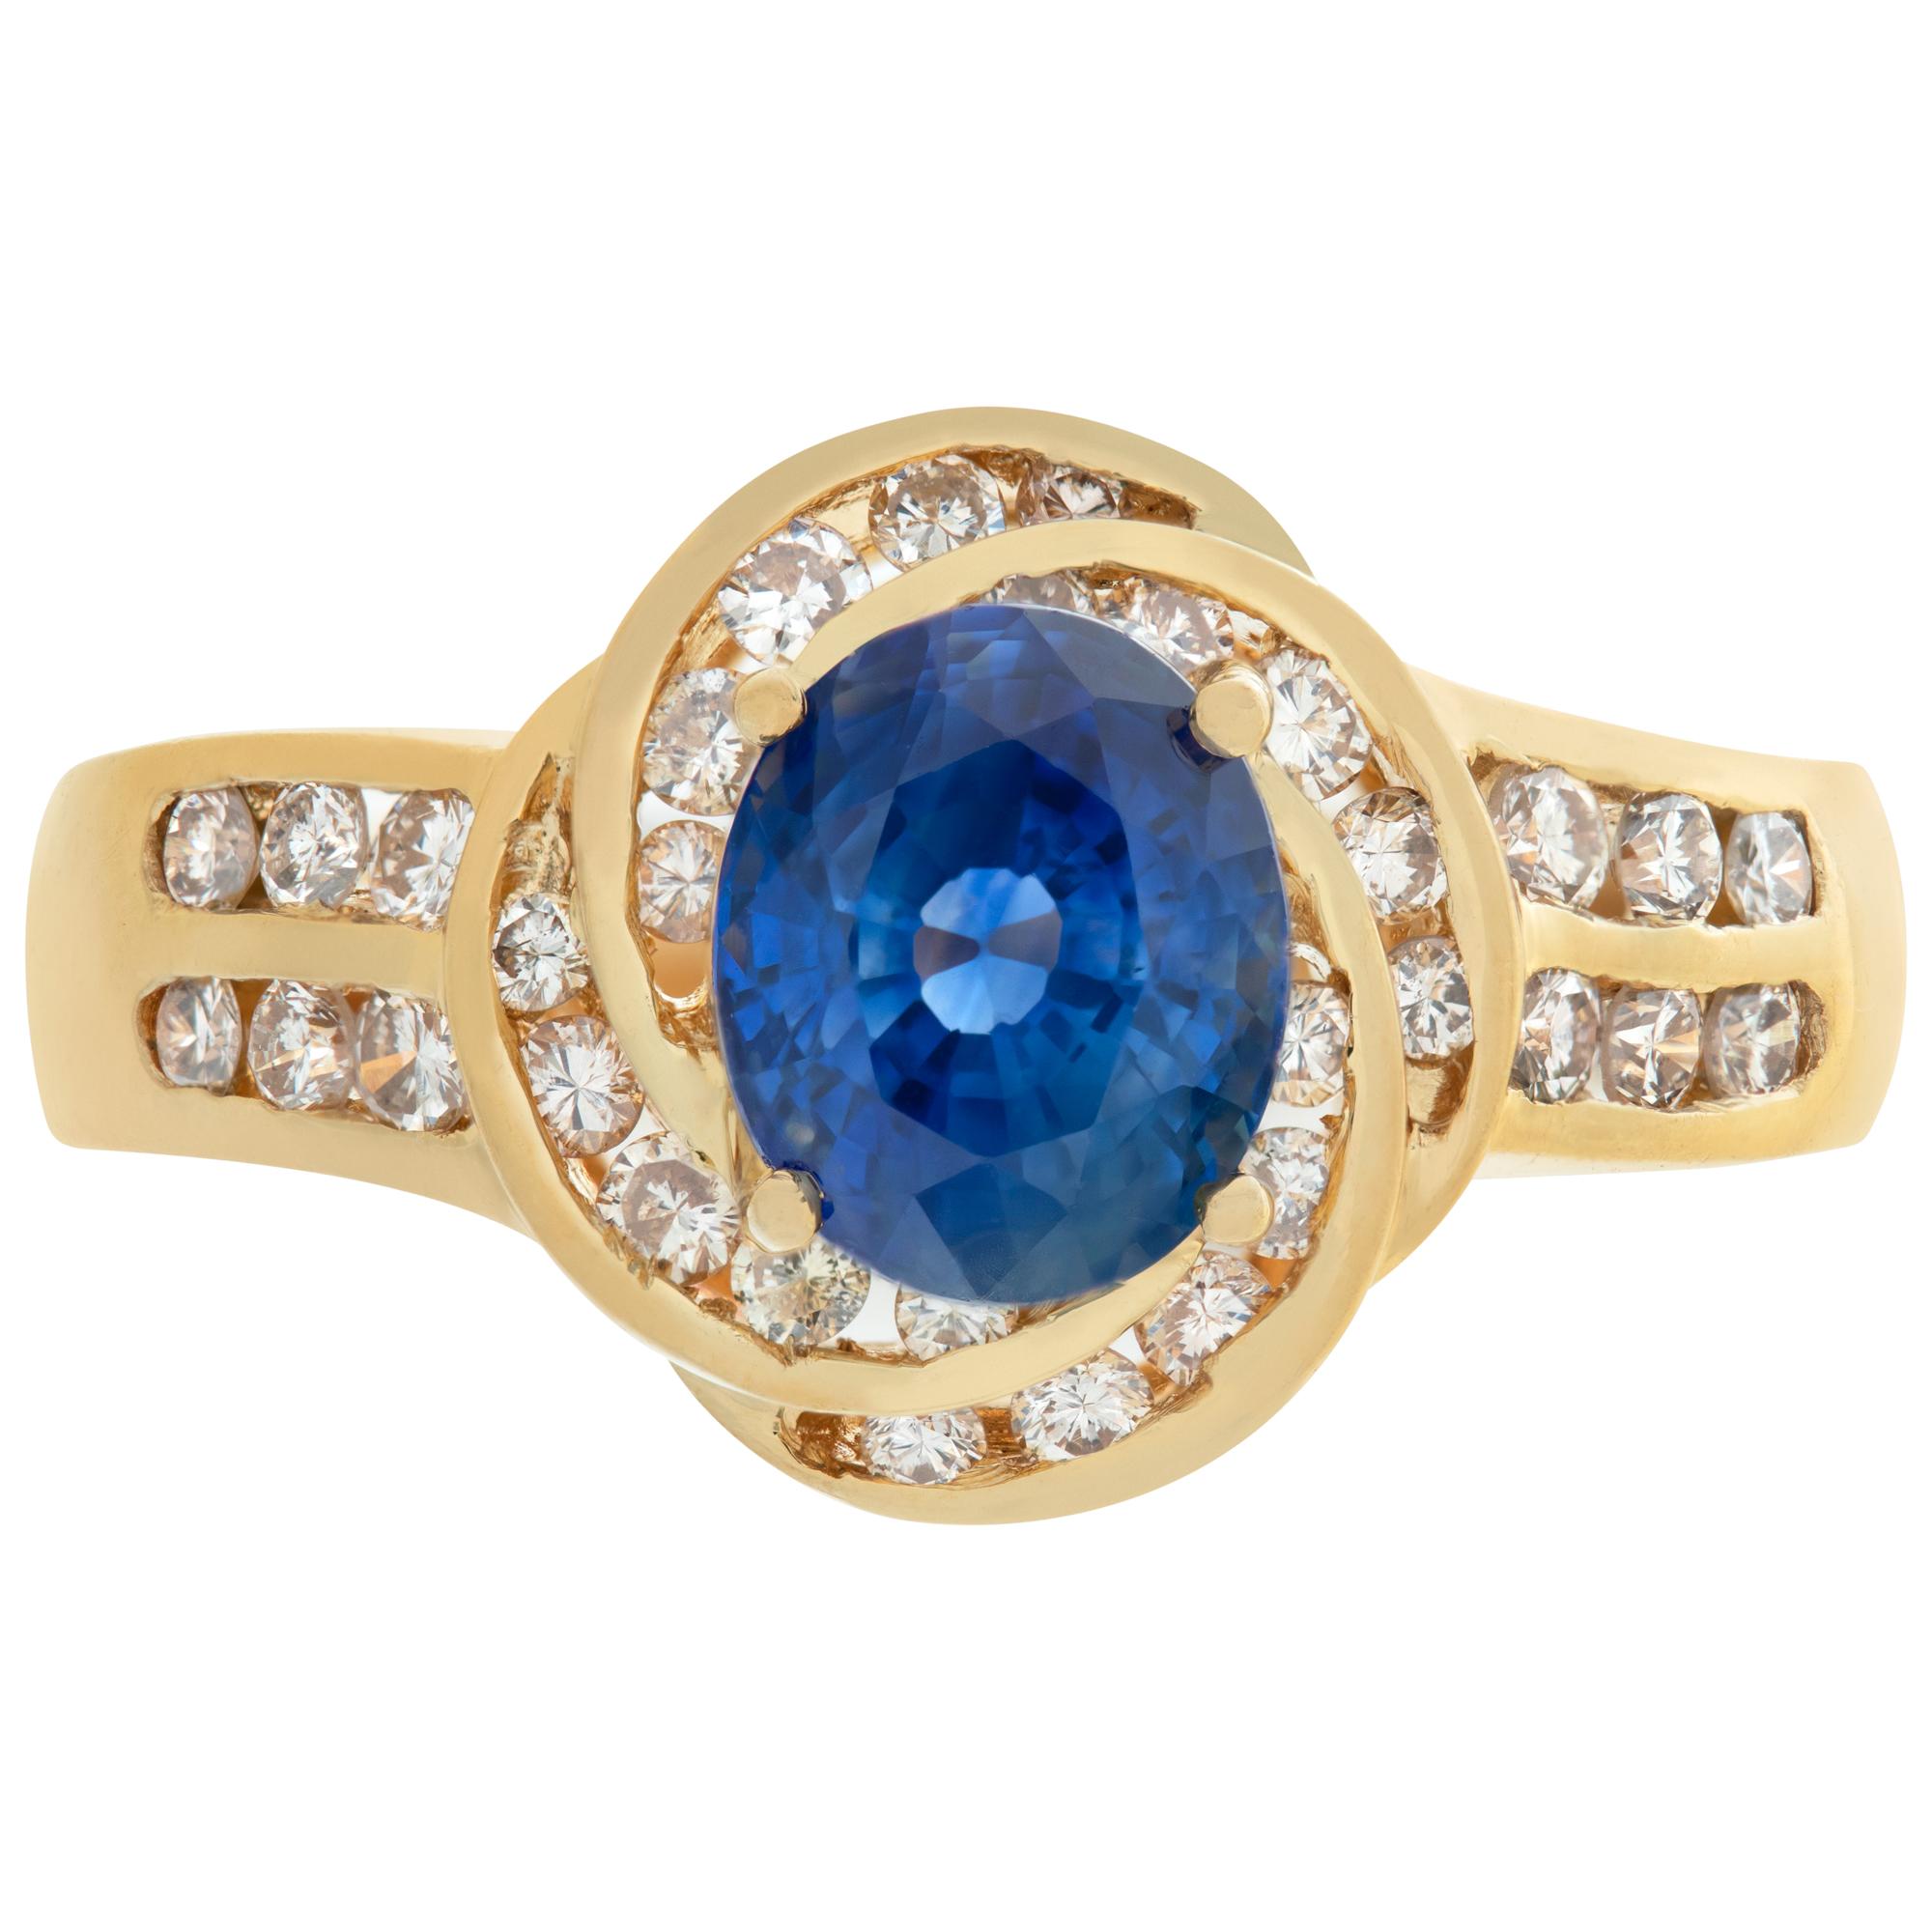 Lovely & bright blue sapphire ring with approximate 1 carat center sapphire and 0.5 carat in surrounding diamonds in 18k yellow gold. Size 6.5, width 1.5mm - 3mm.This Diamond/Sapphires ring is currently size 6.5 and some items can be sized up or